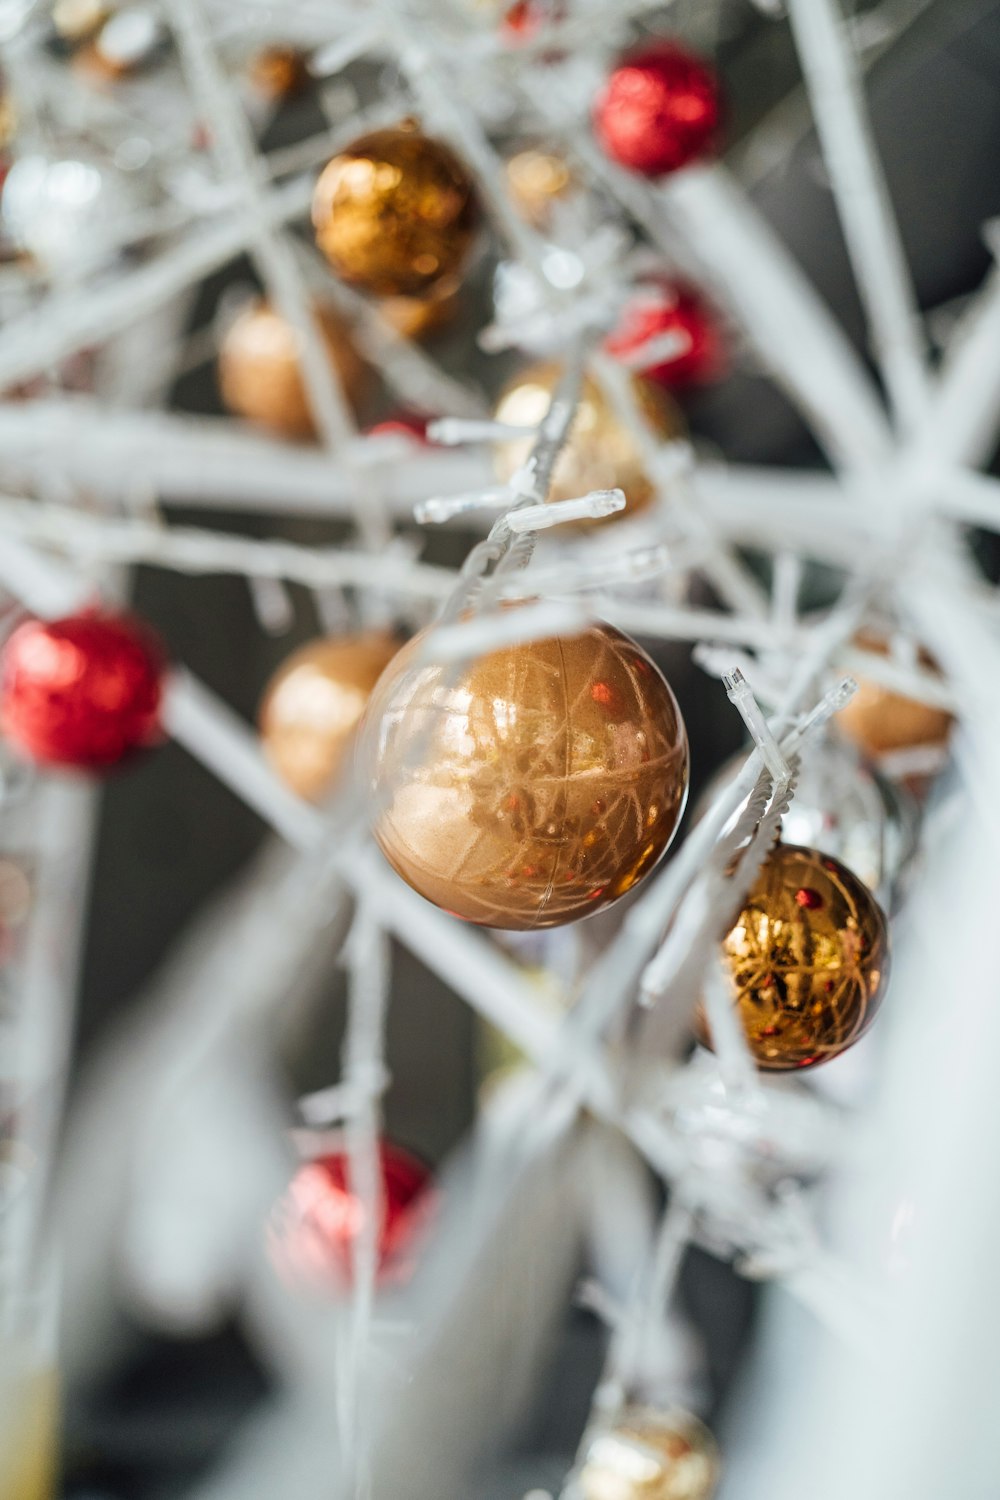 a ferris wheel with ornaments hanging from it